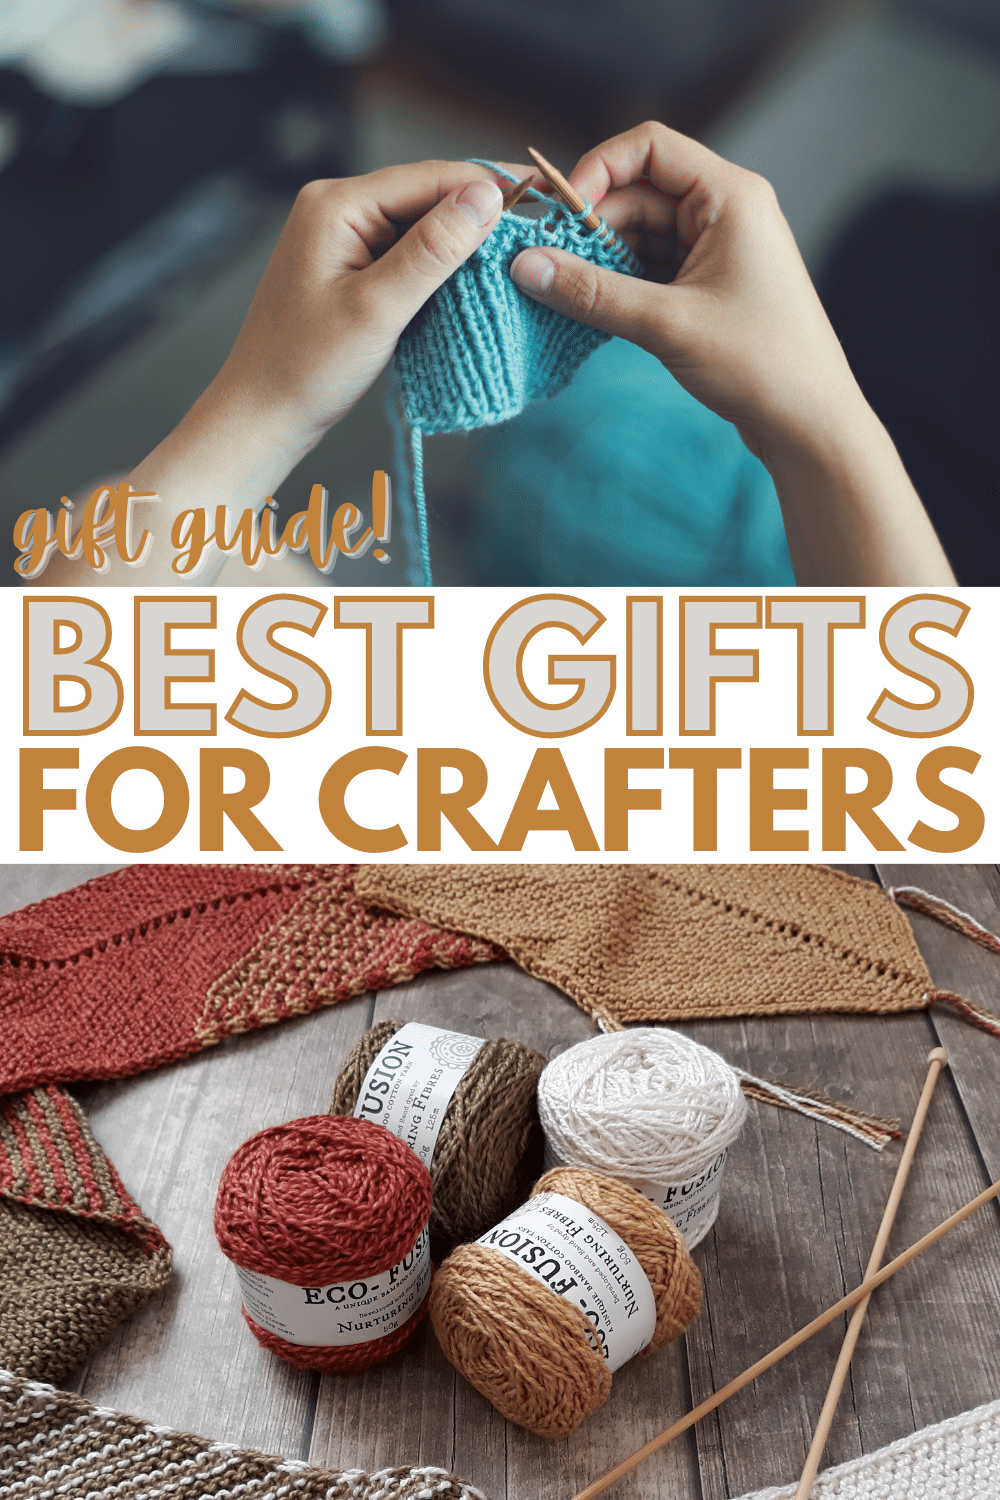 Crafty people can be hard to buy for since they can make almost anything! This list of the best gifts for crafters has plenty of options sure to please. #giftguide #giftideas #crafters via @wondermomwannab